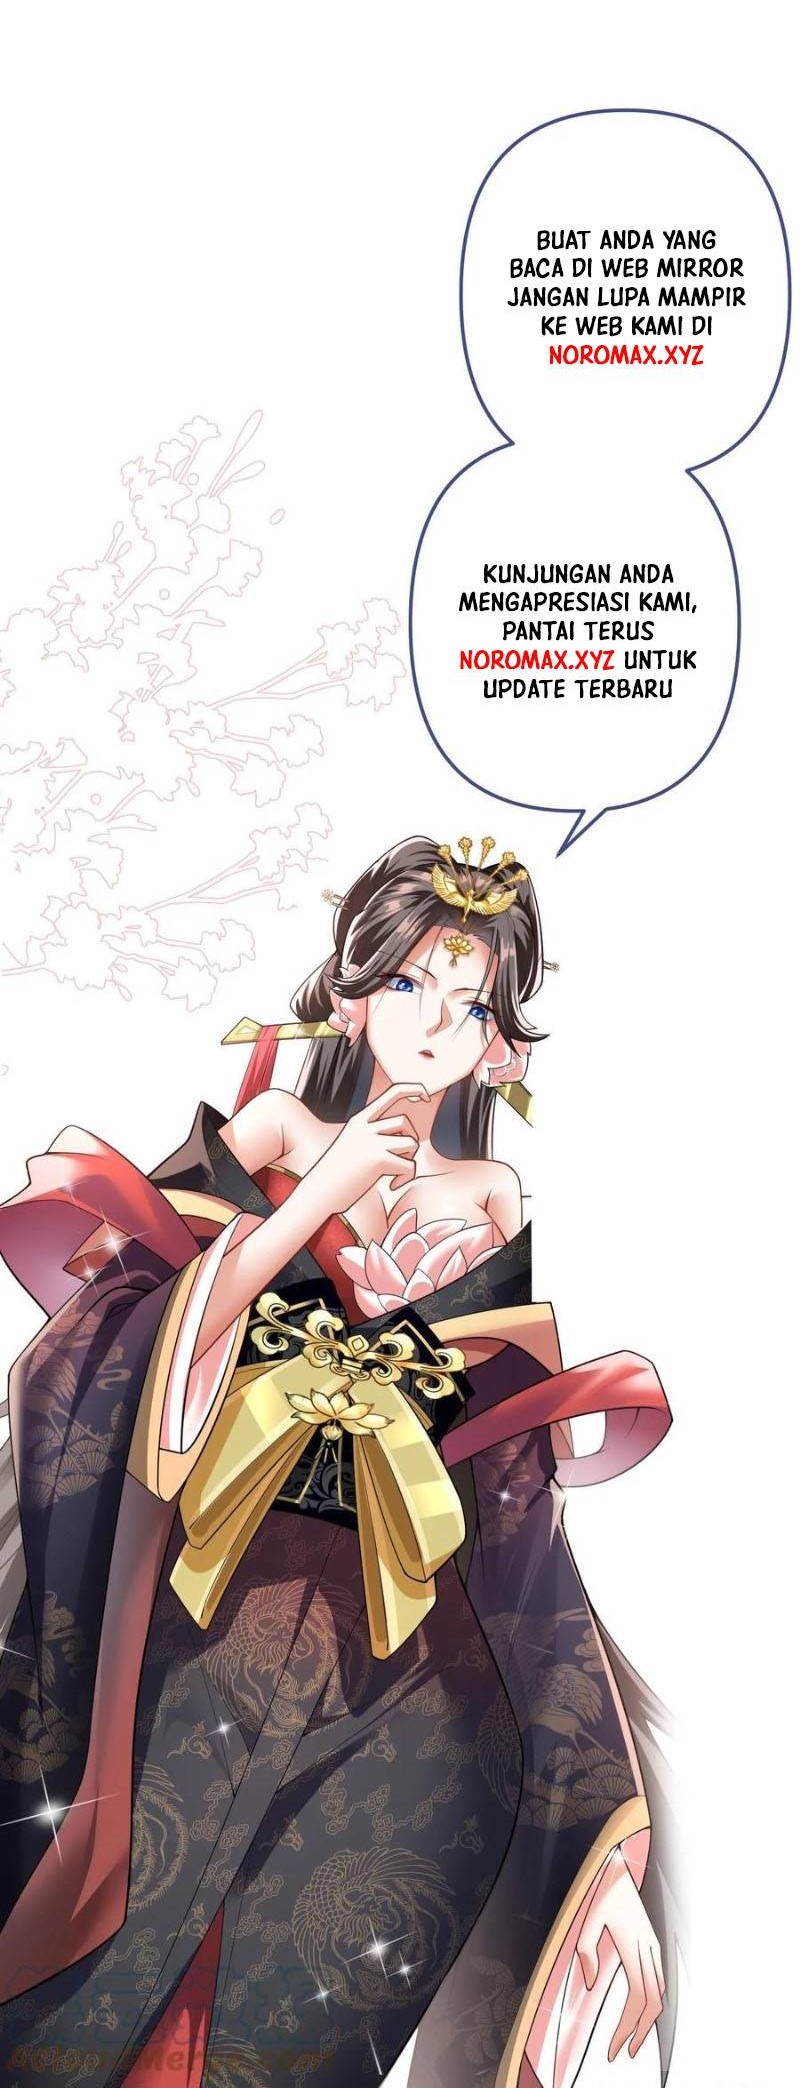 It’s Over! The Queen’s Soft Rice Husband is Actually Invincible Chapter 116